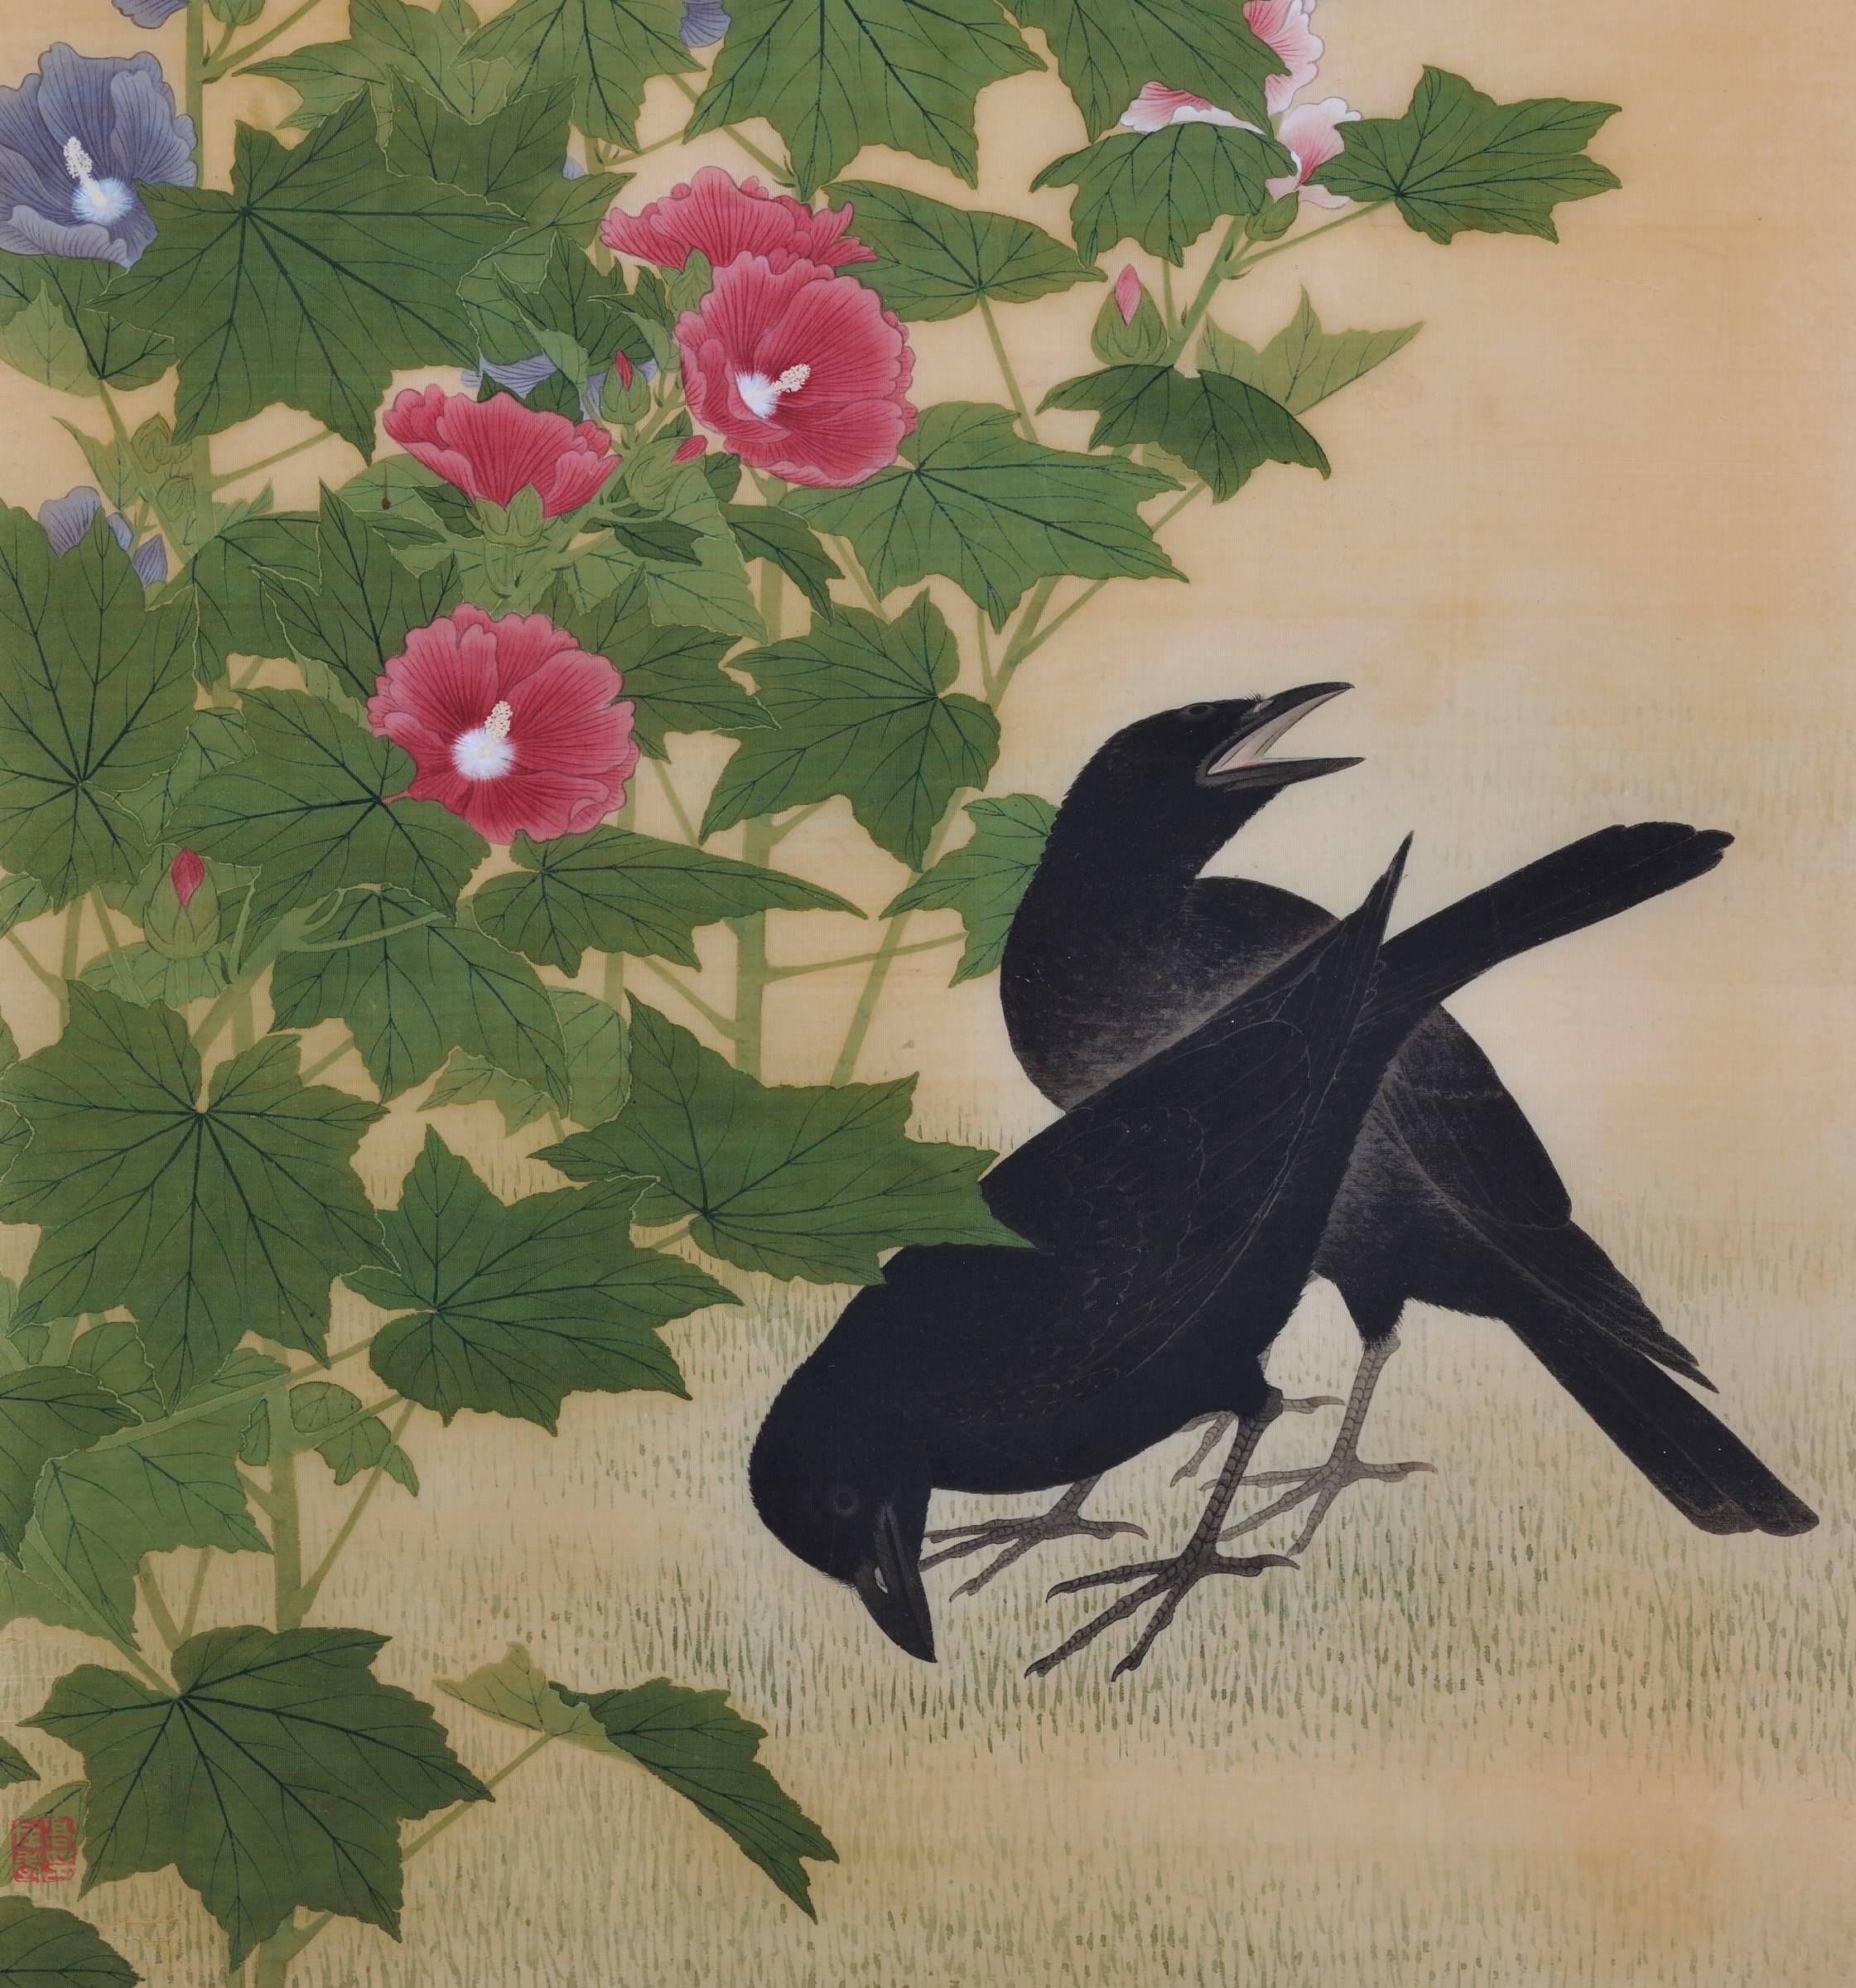 Takakura Zaiko (fl.1854-1860)

Birds and flowers of the seasons

Ravens and hibiscus

Ink and color on silk

Seal: Taka Zaiko no in 

Dimensions:

H 39” x W 16.5” (100 cm x 42.5 cm)

Bird and flower paintings by the artist Takakura